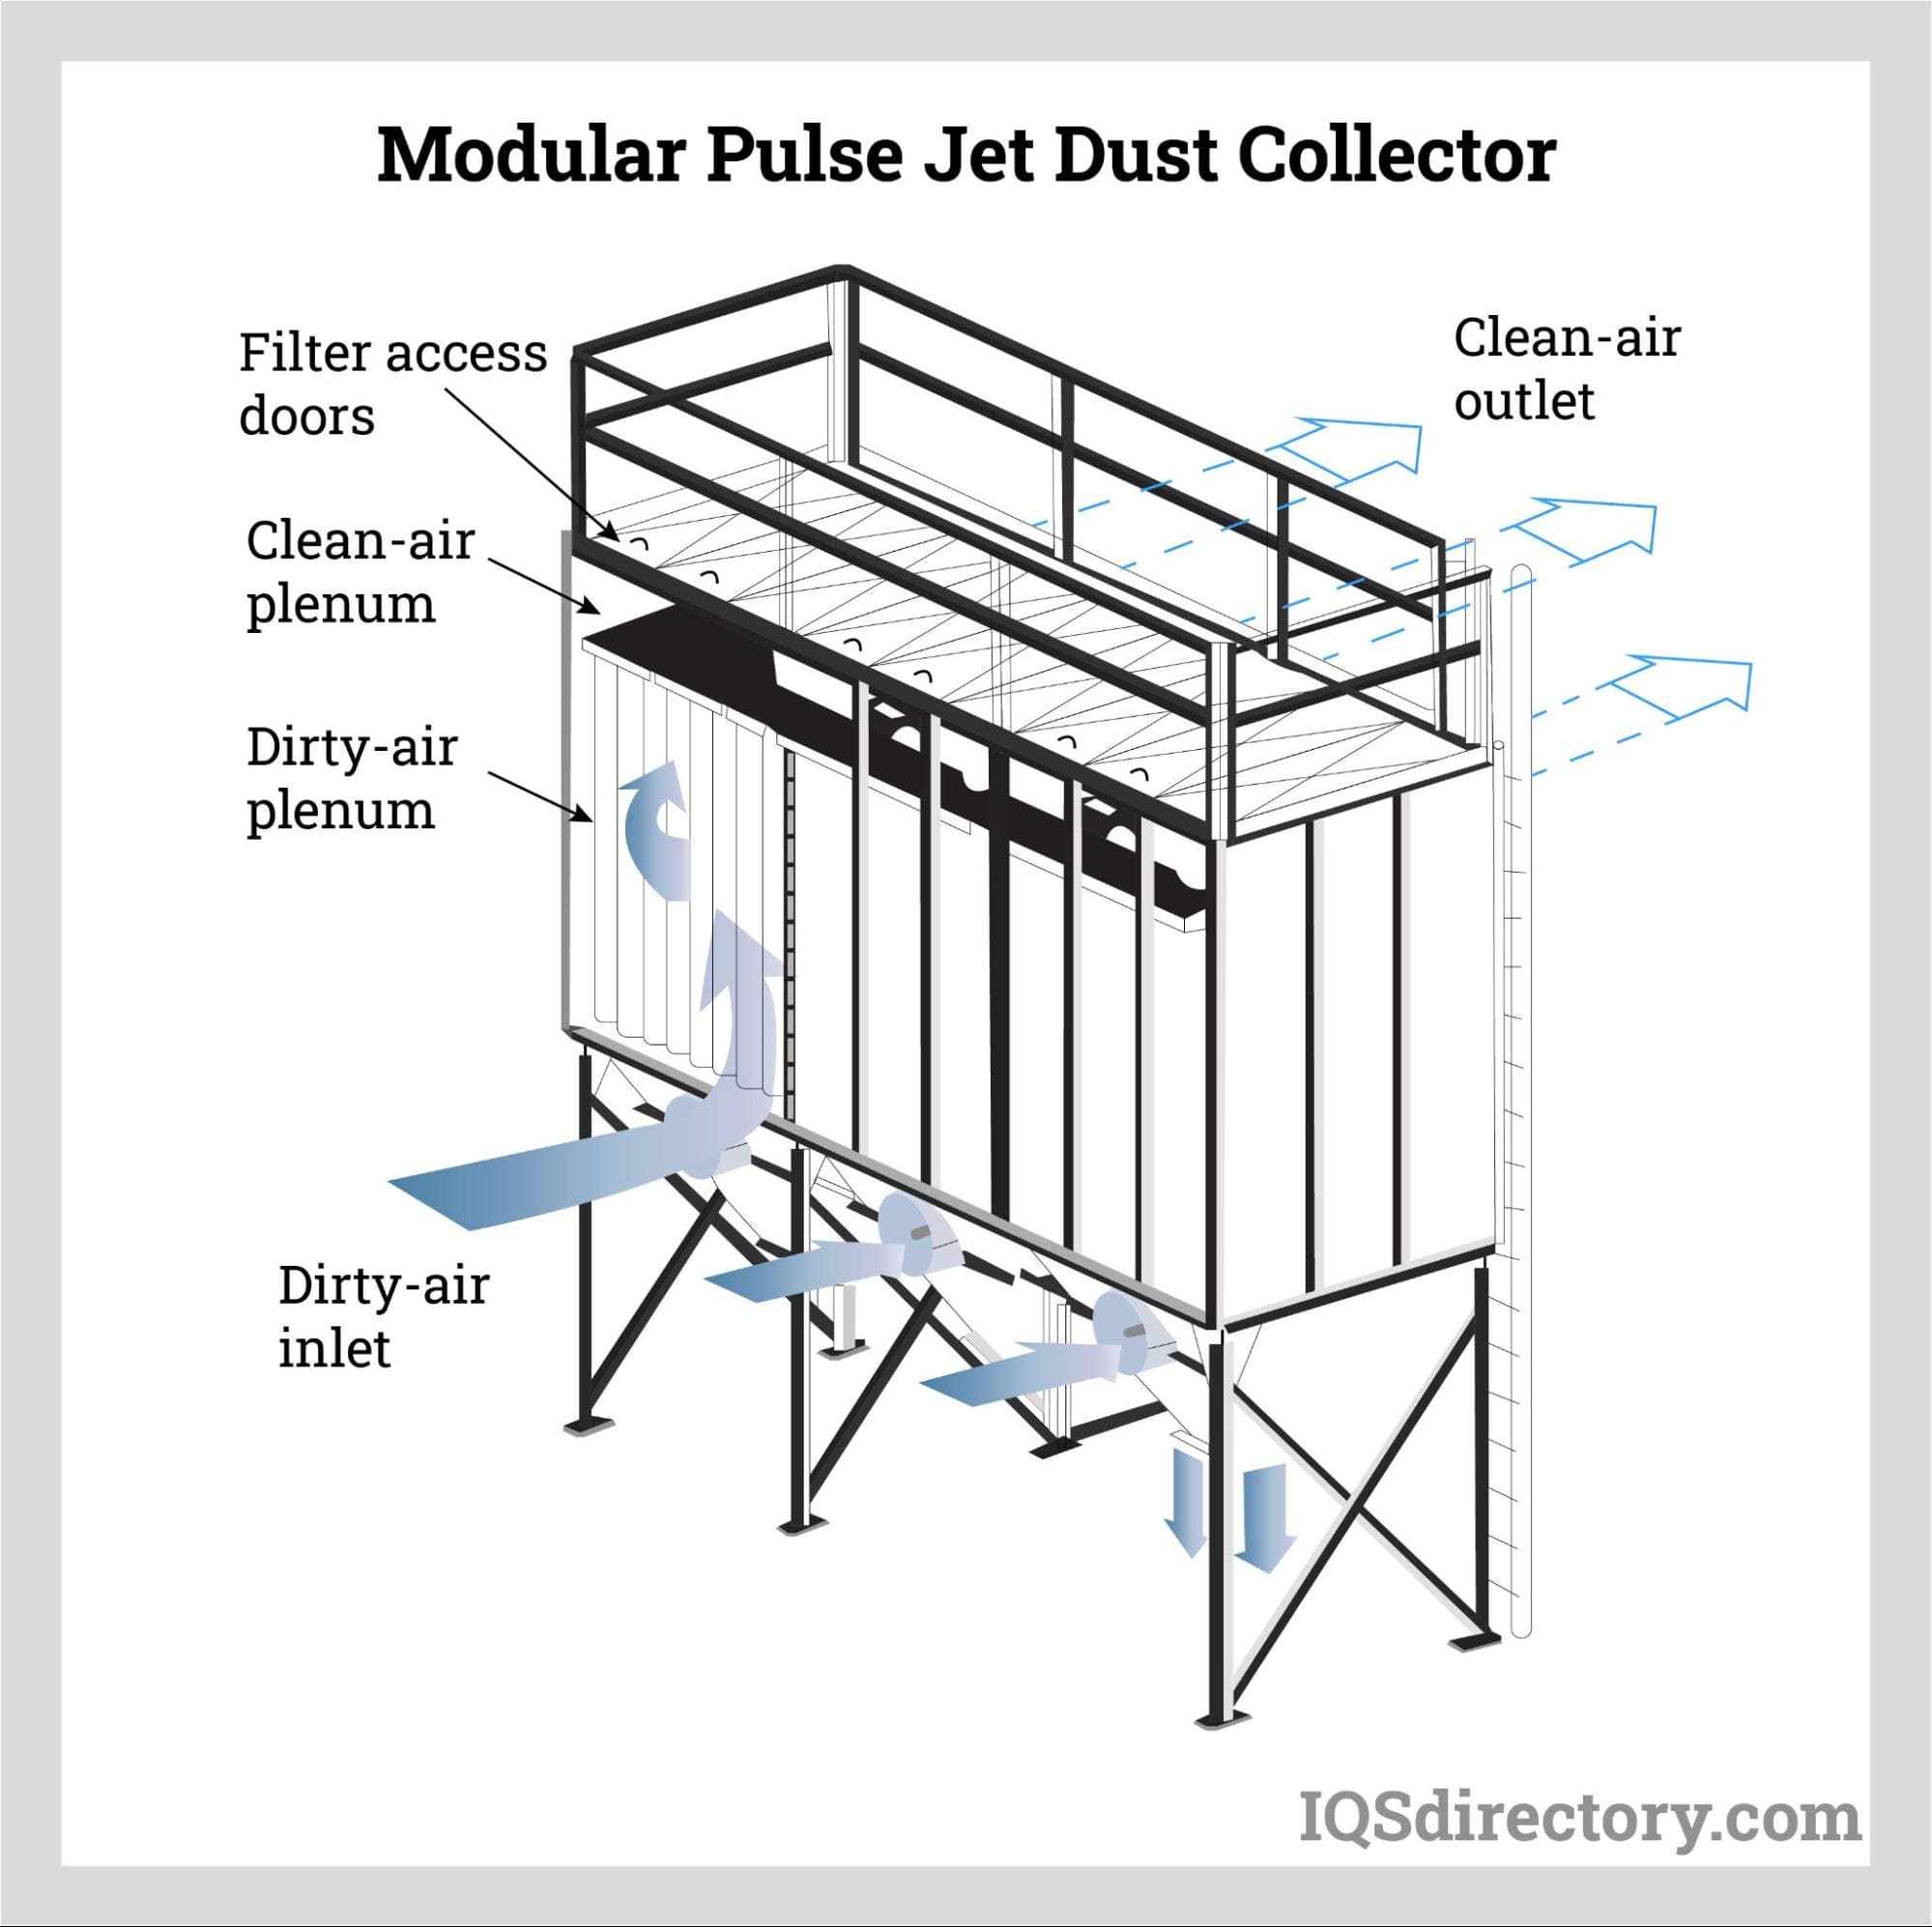 Pulse Jet Dust Collectors: Types, Uses, Features and Benefits